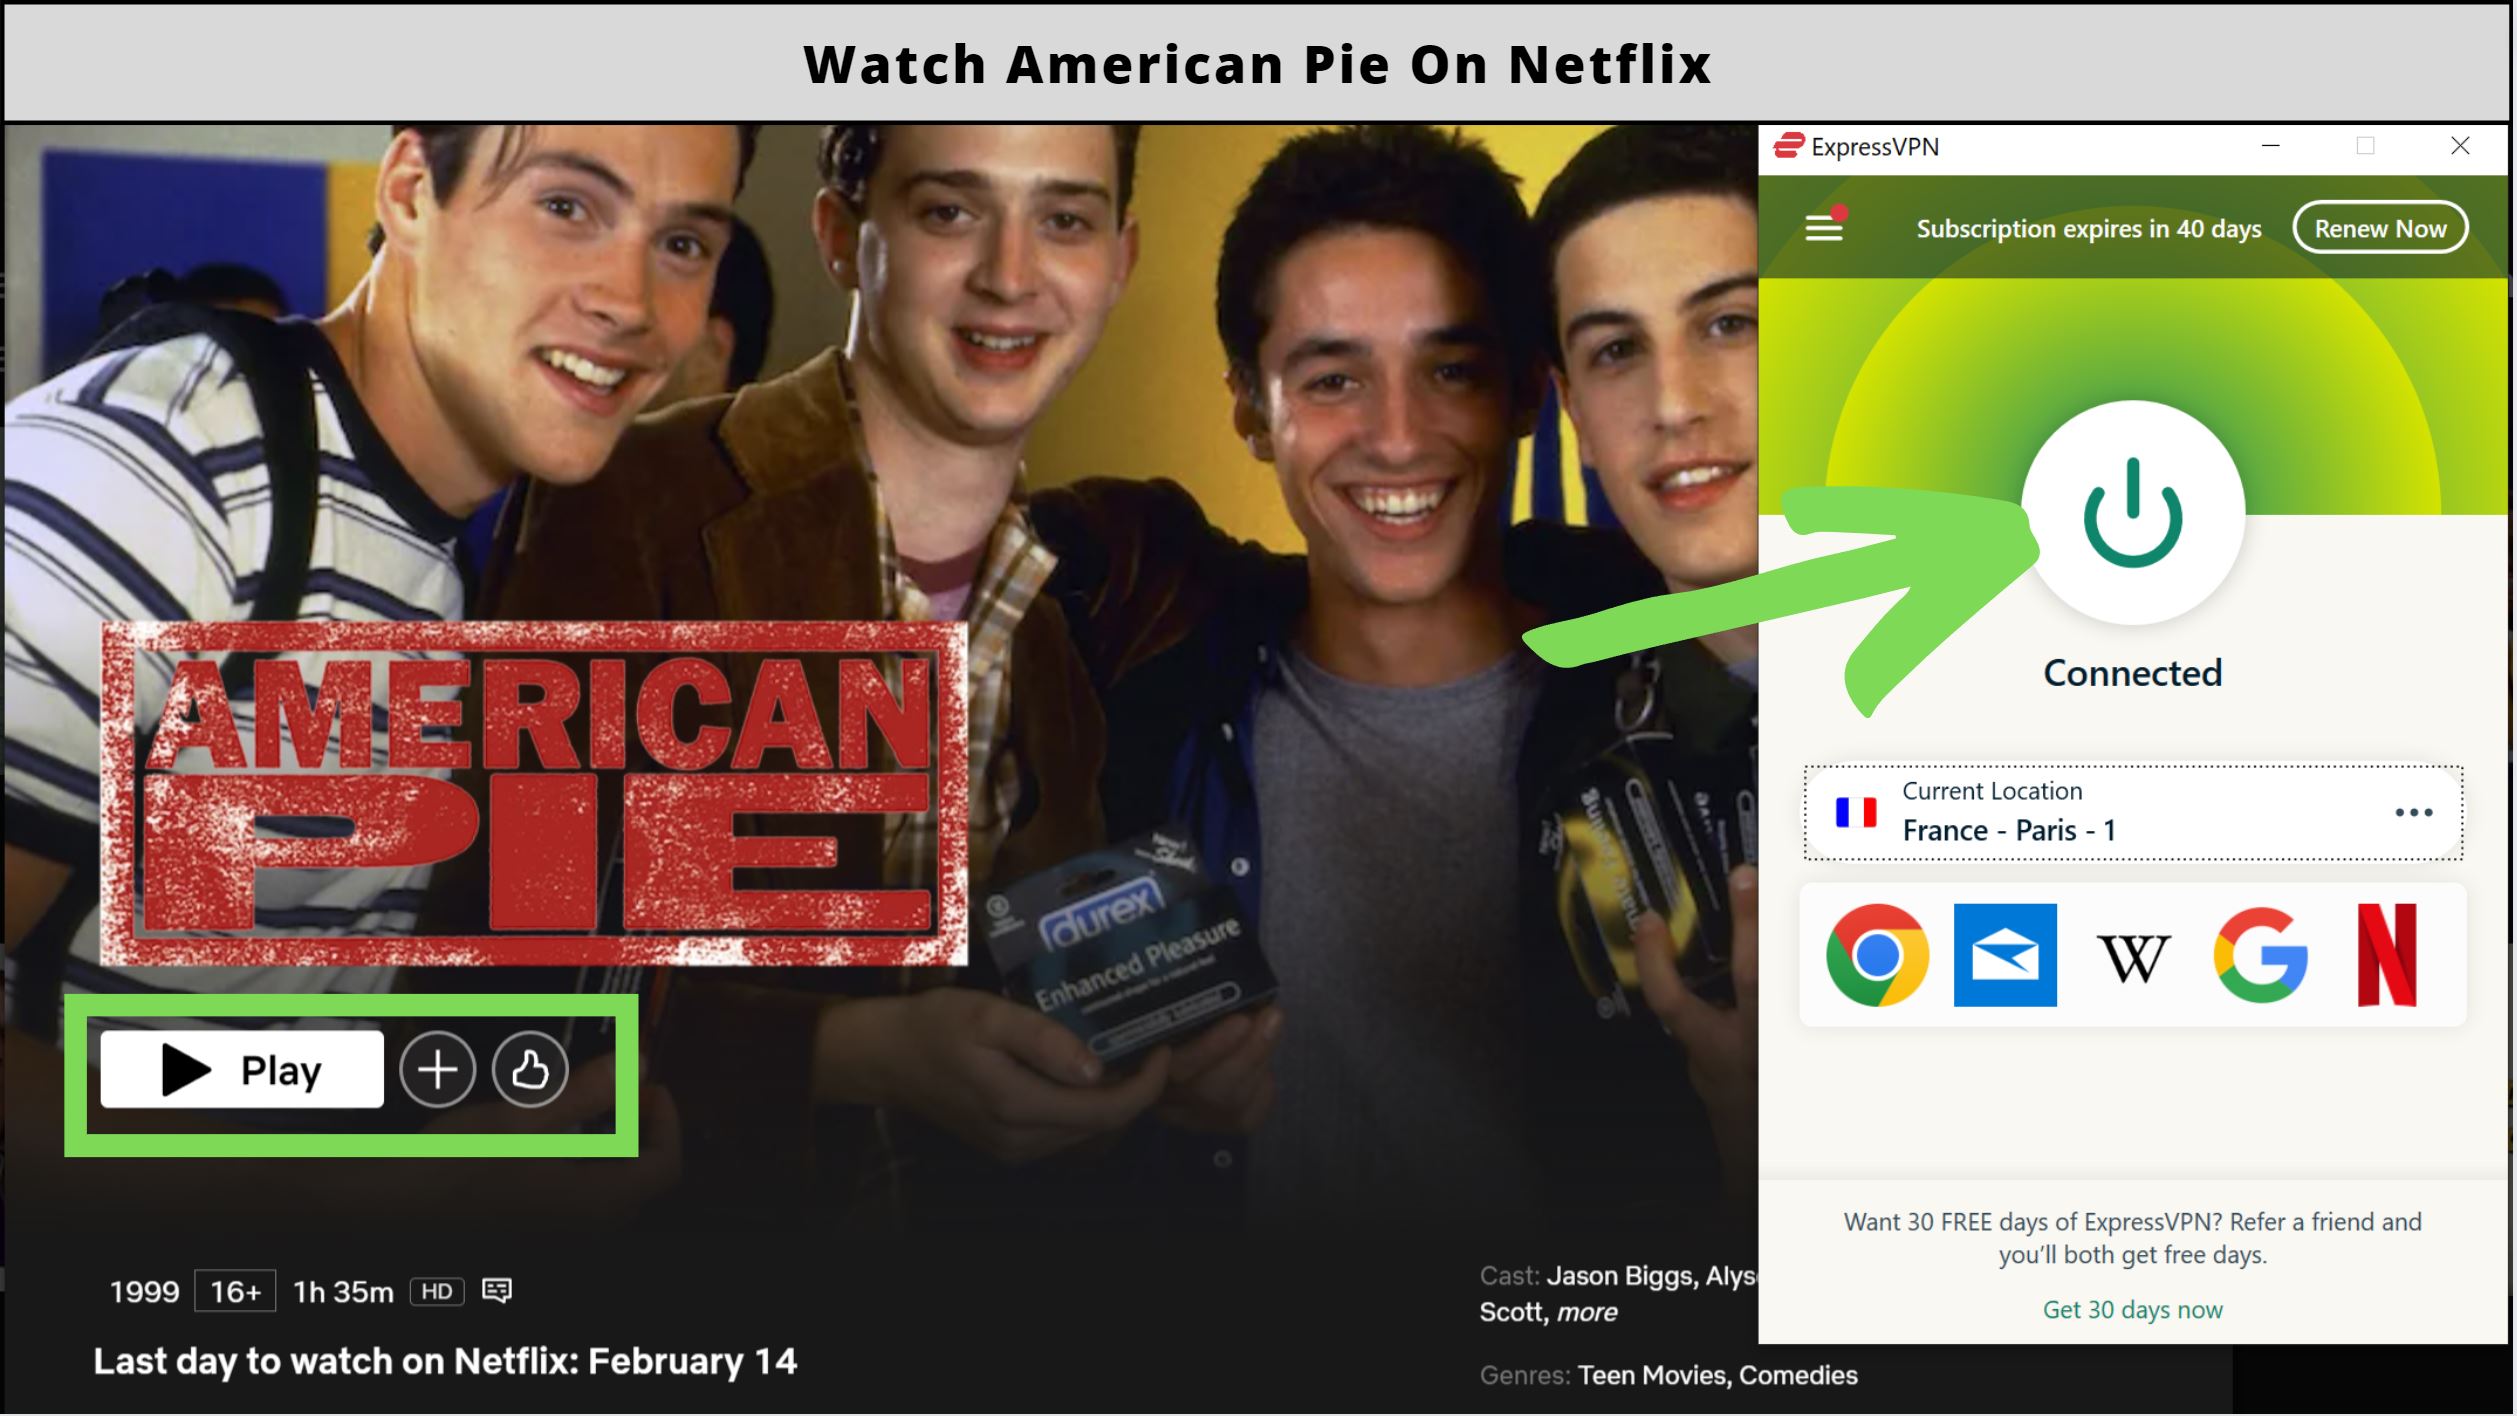 Is American Pie On Netflix (Yes) Watch All Parts On Netflix